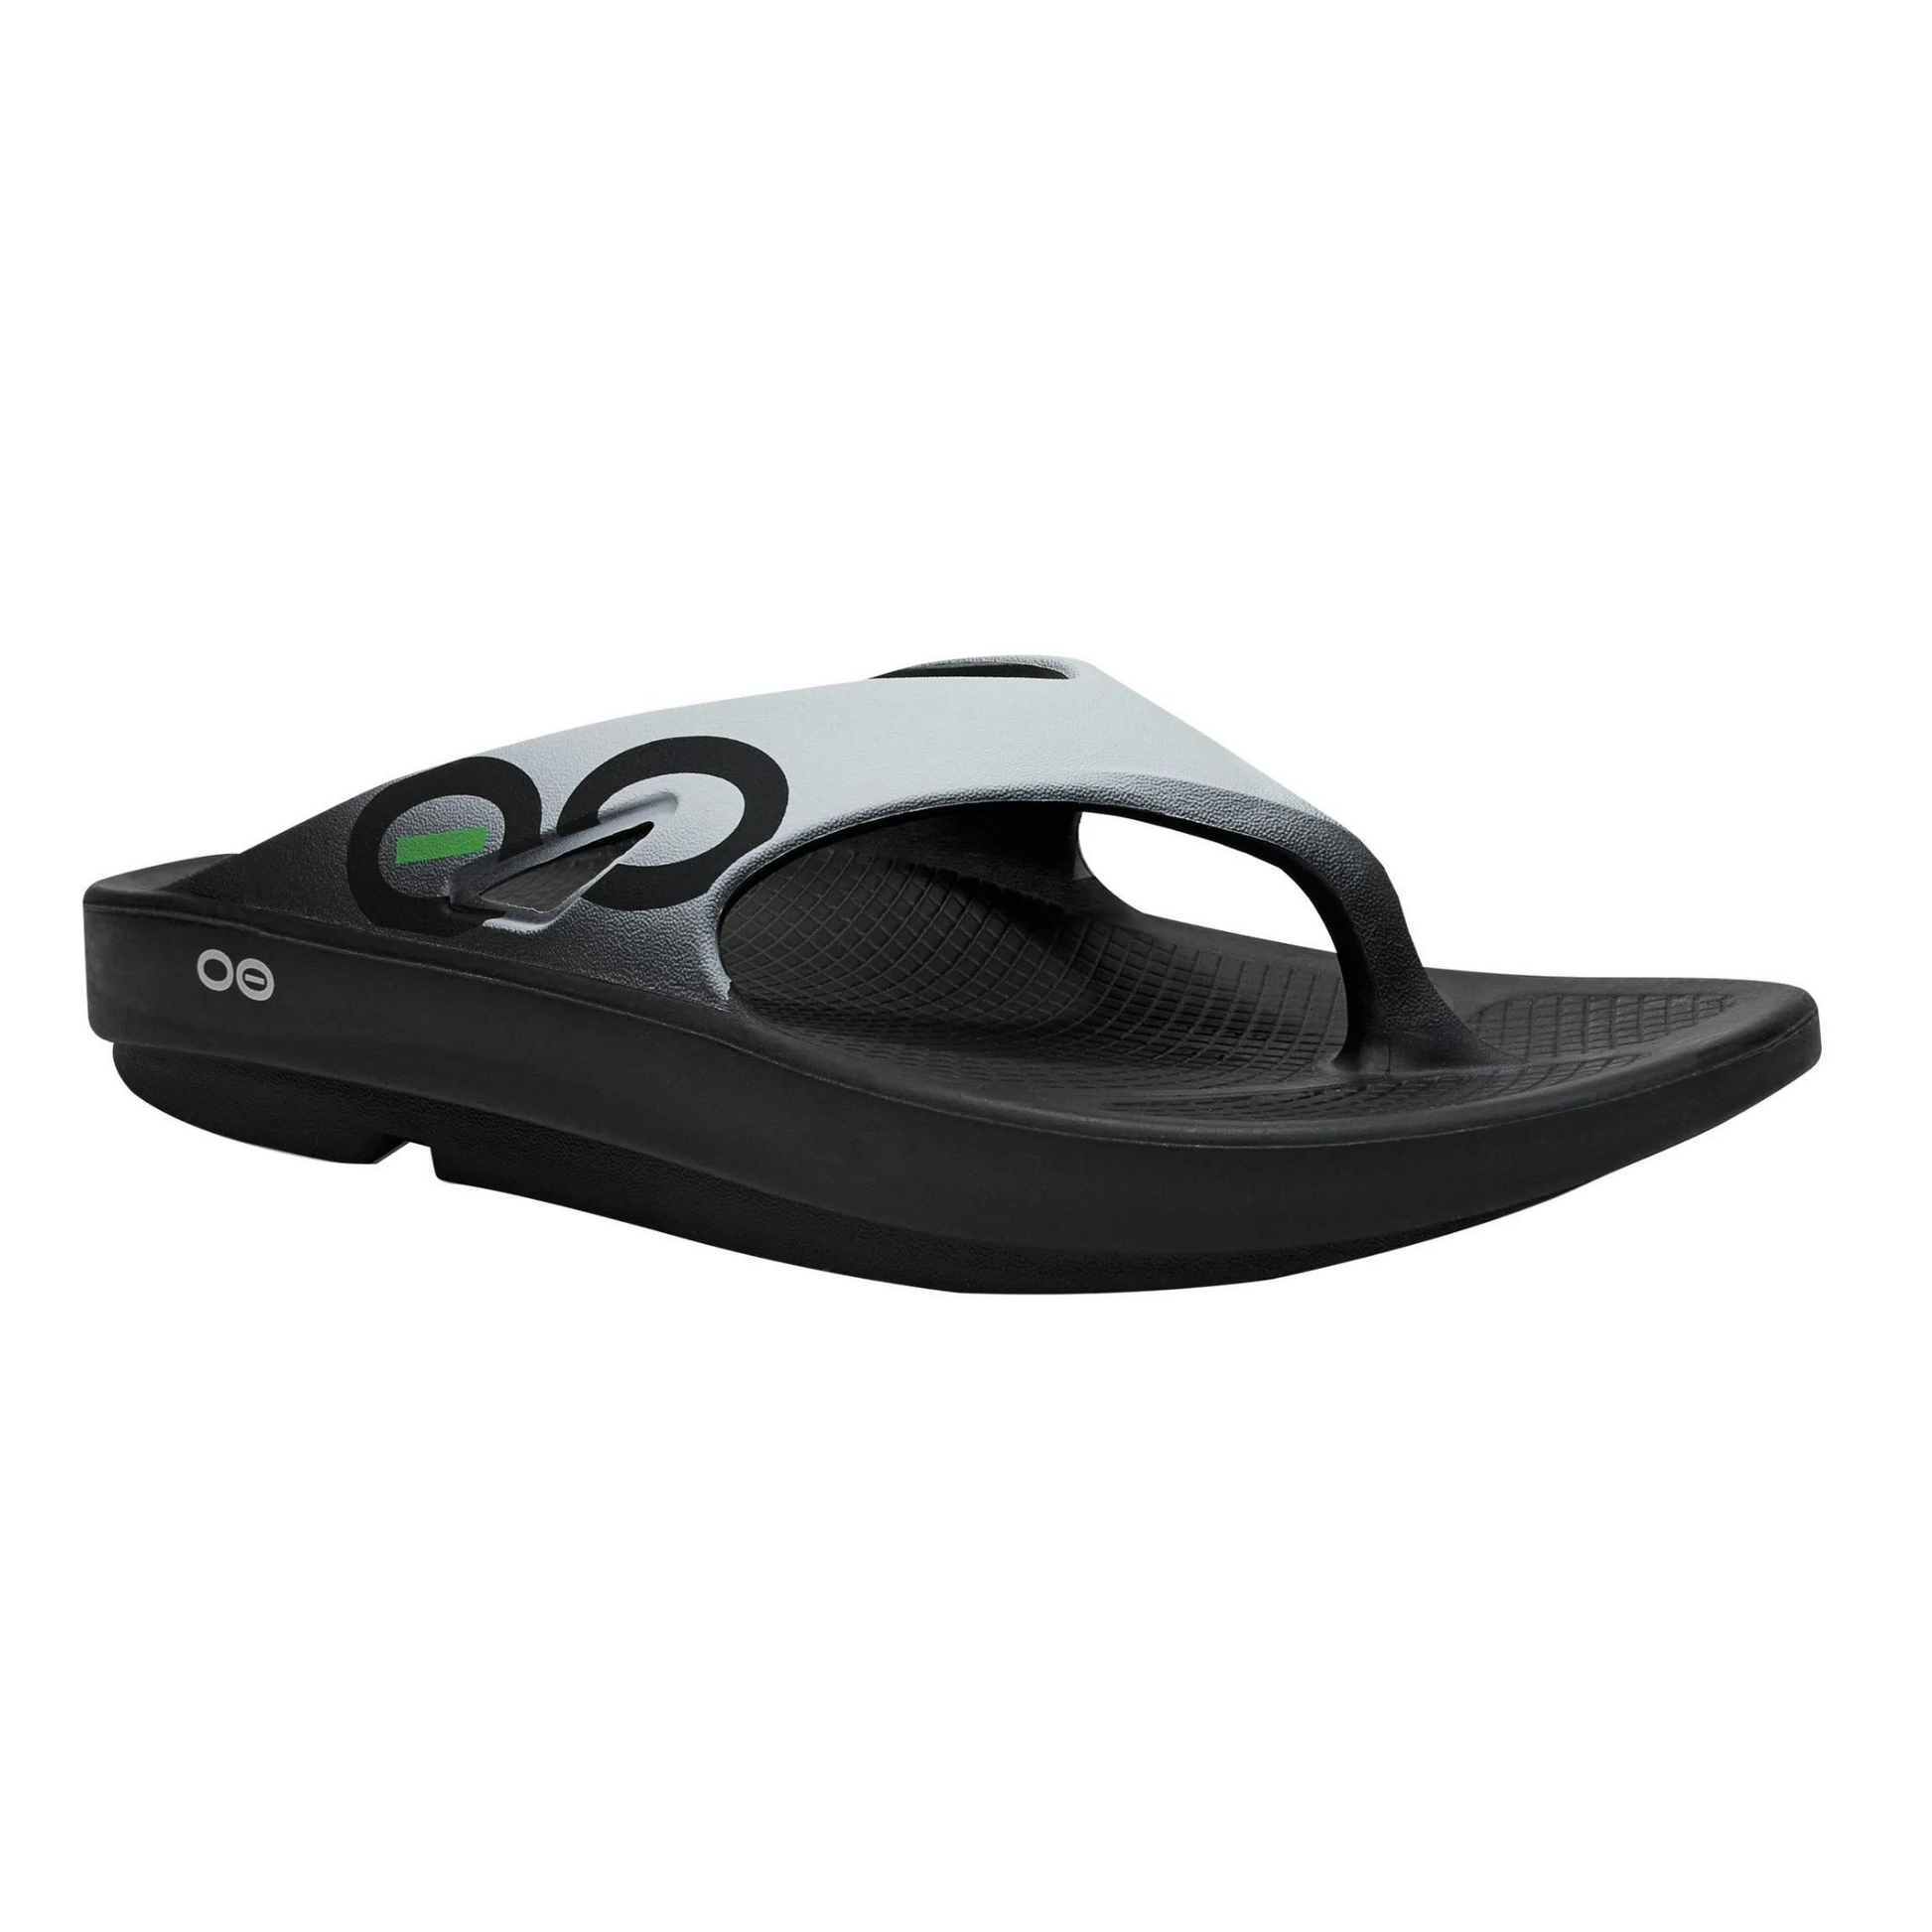 Flip flop with thick arched black sole to ombré light grey upper. 